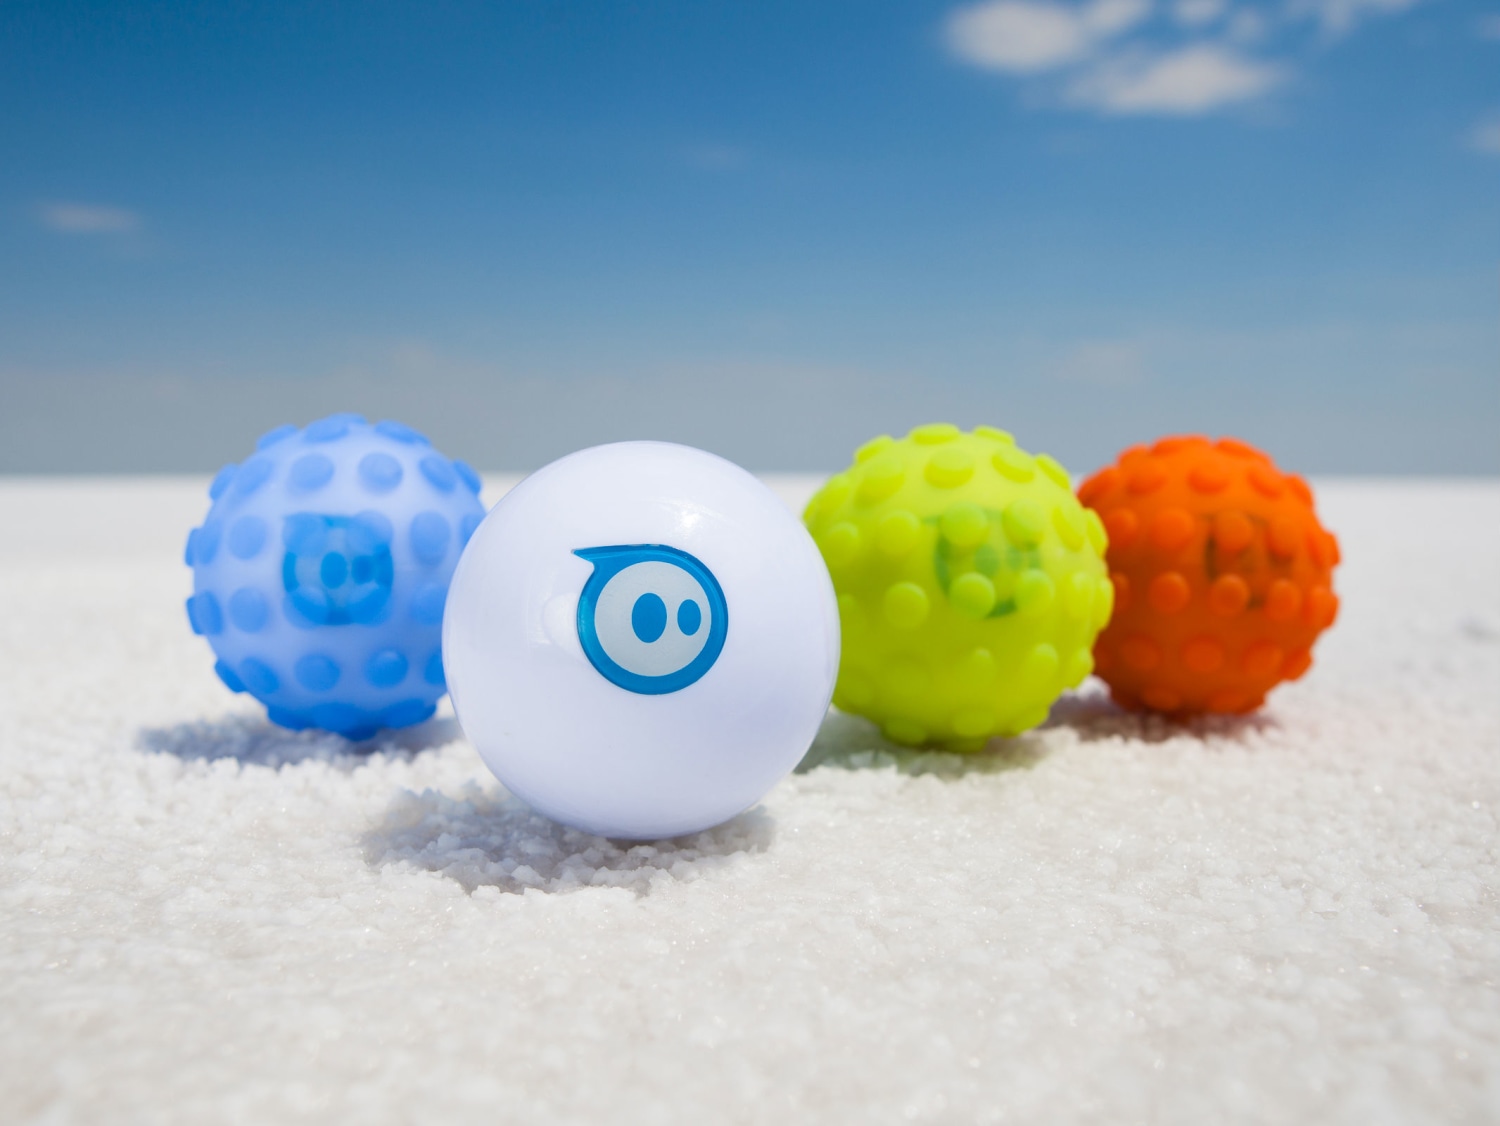 Sphero 2.0 Robotic Ball Gaming System for Smartphone Super Fast Delivery